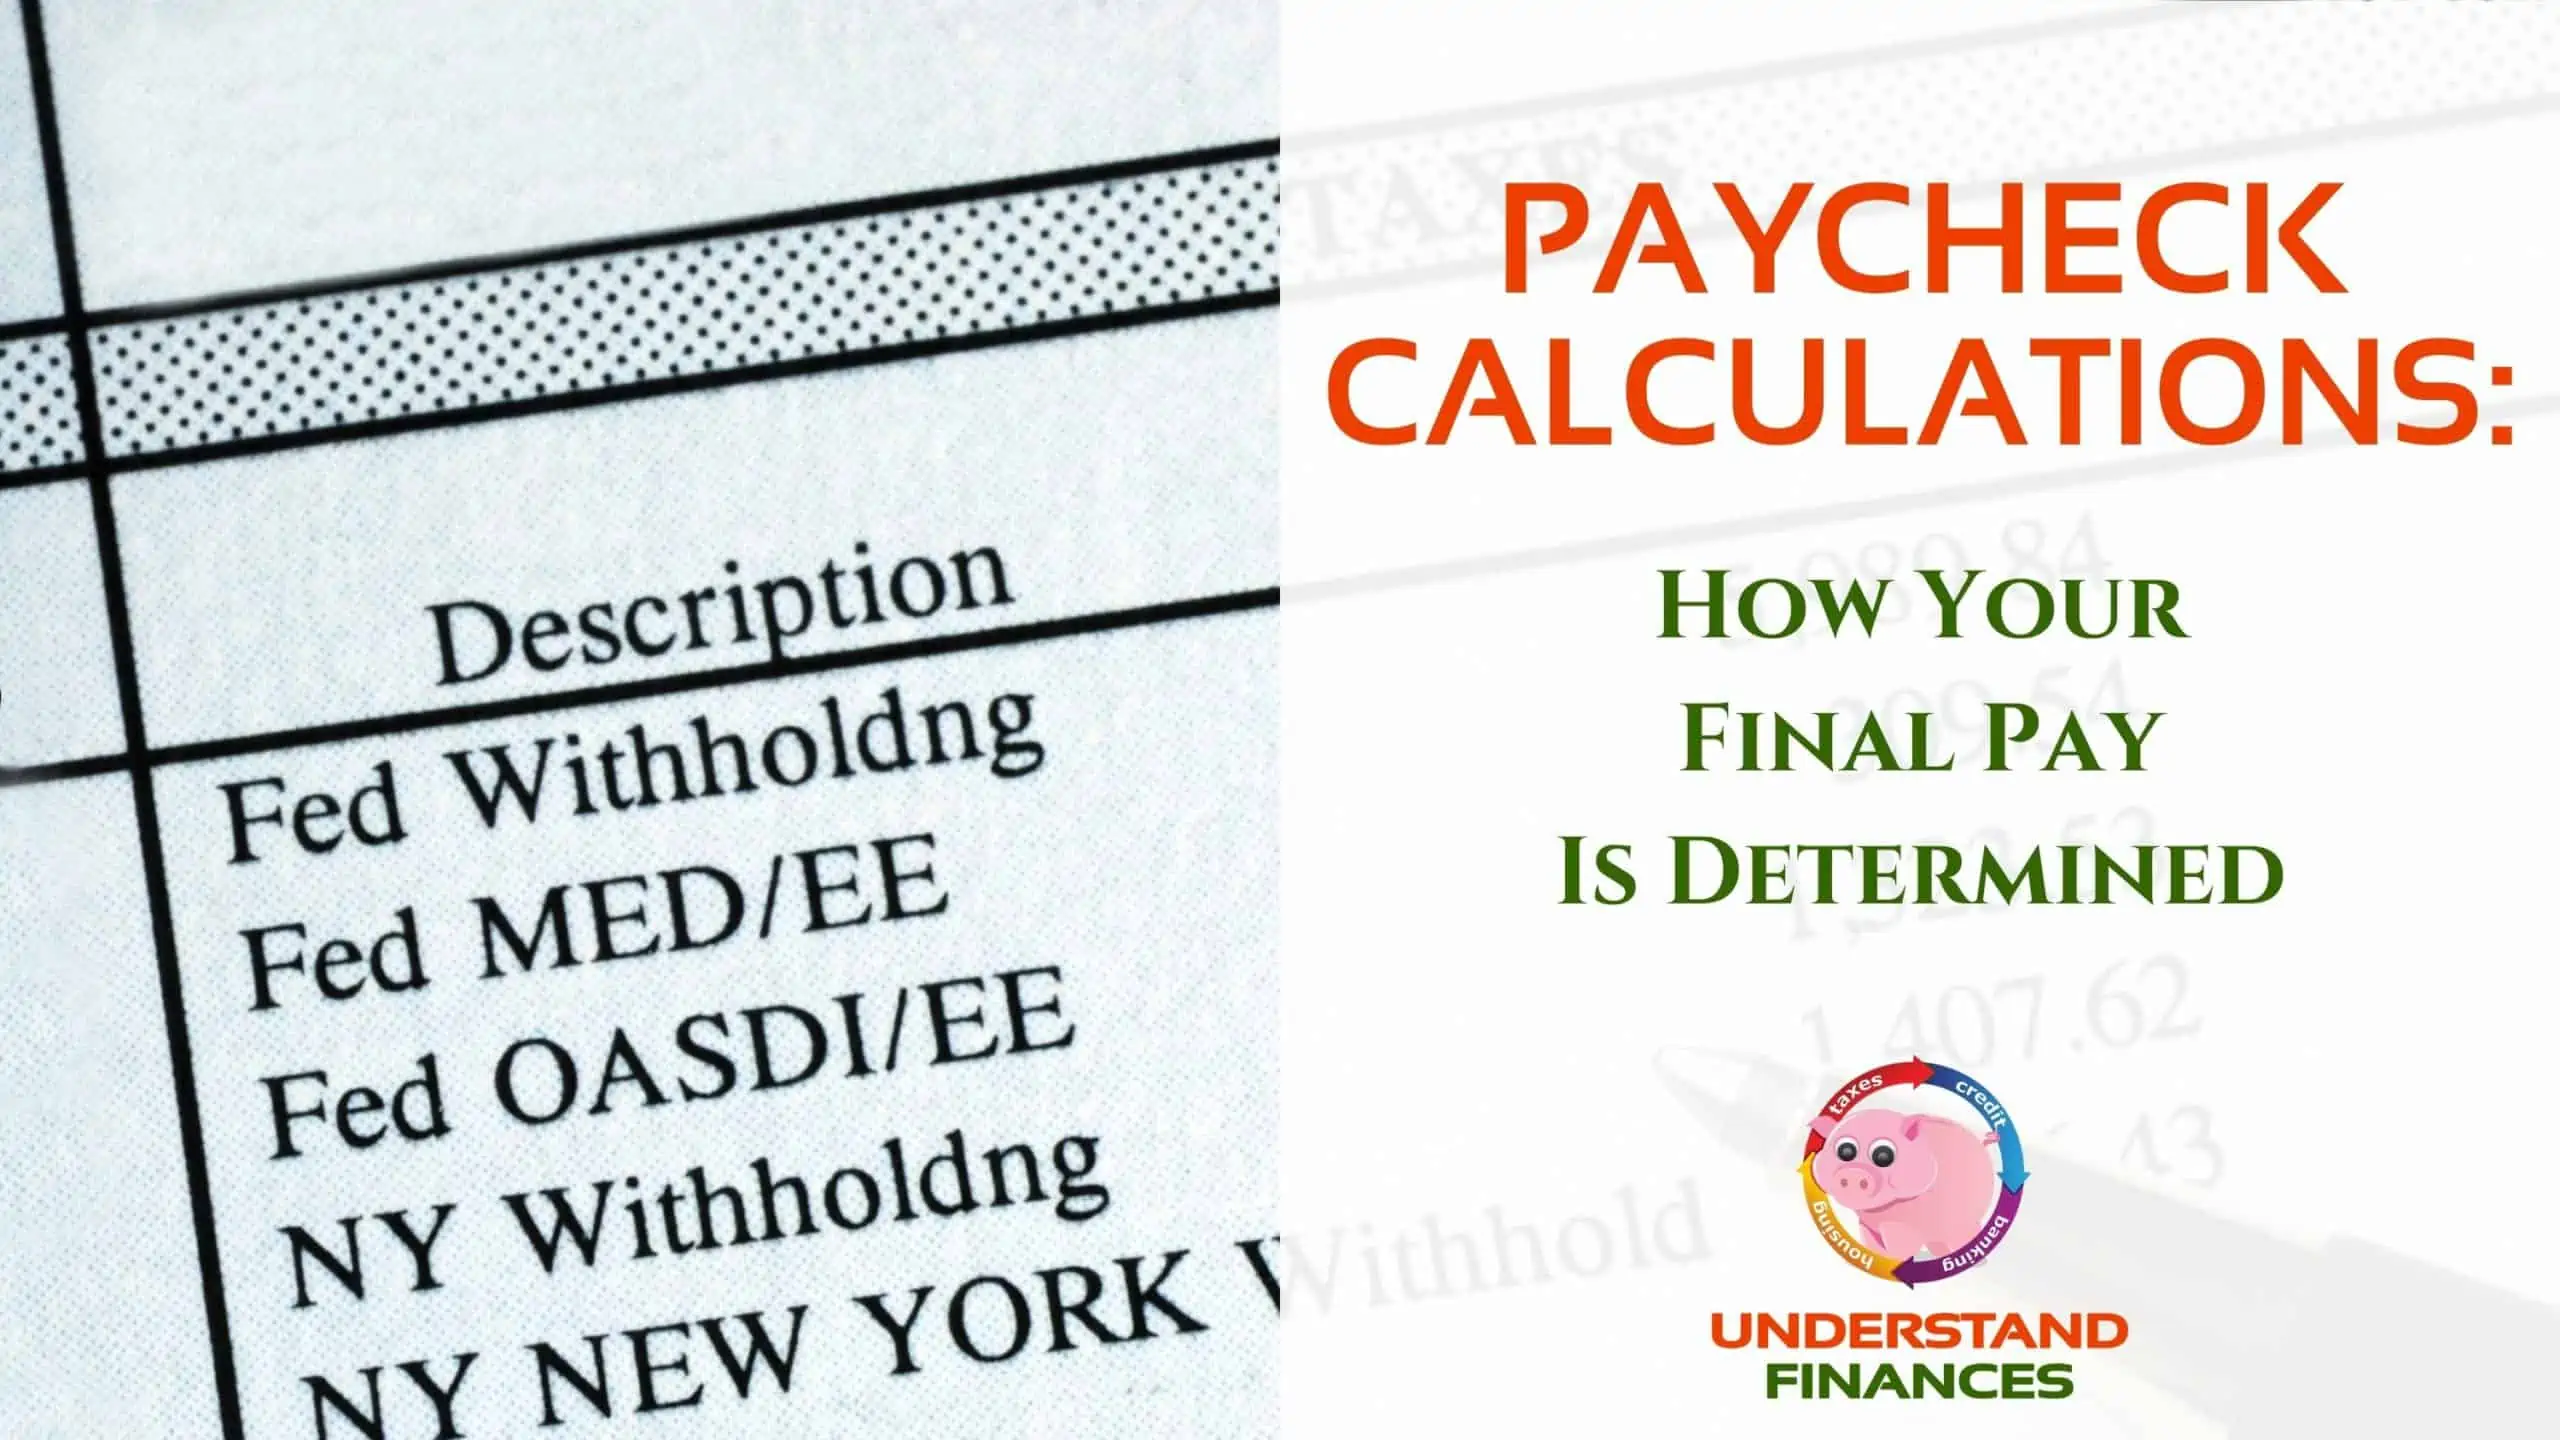 Paycheck Calculations: How Your Final Pay Is Determined